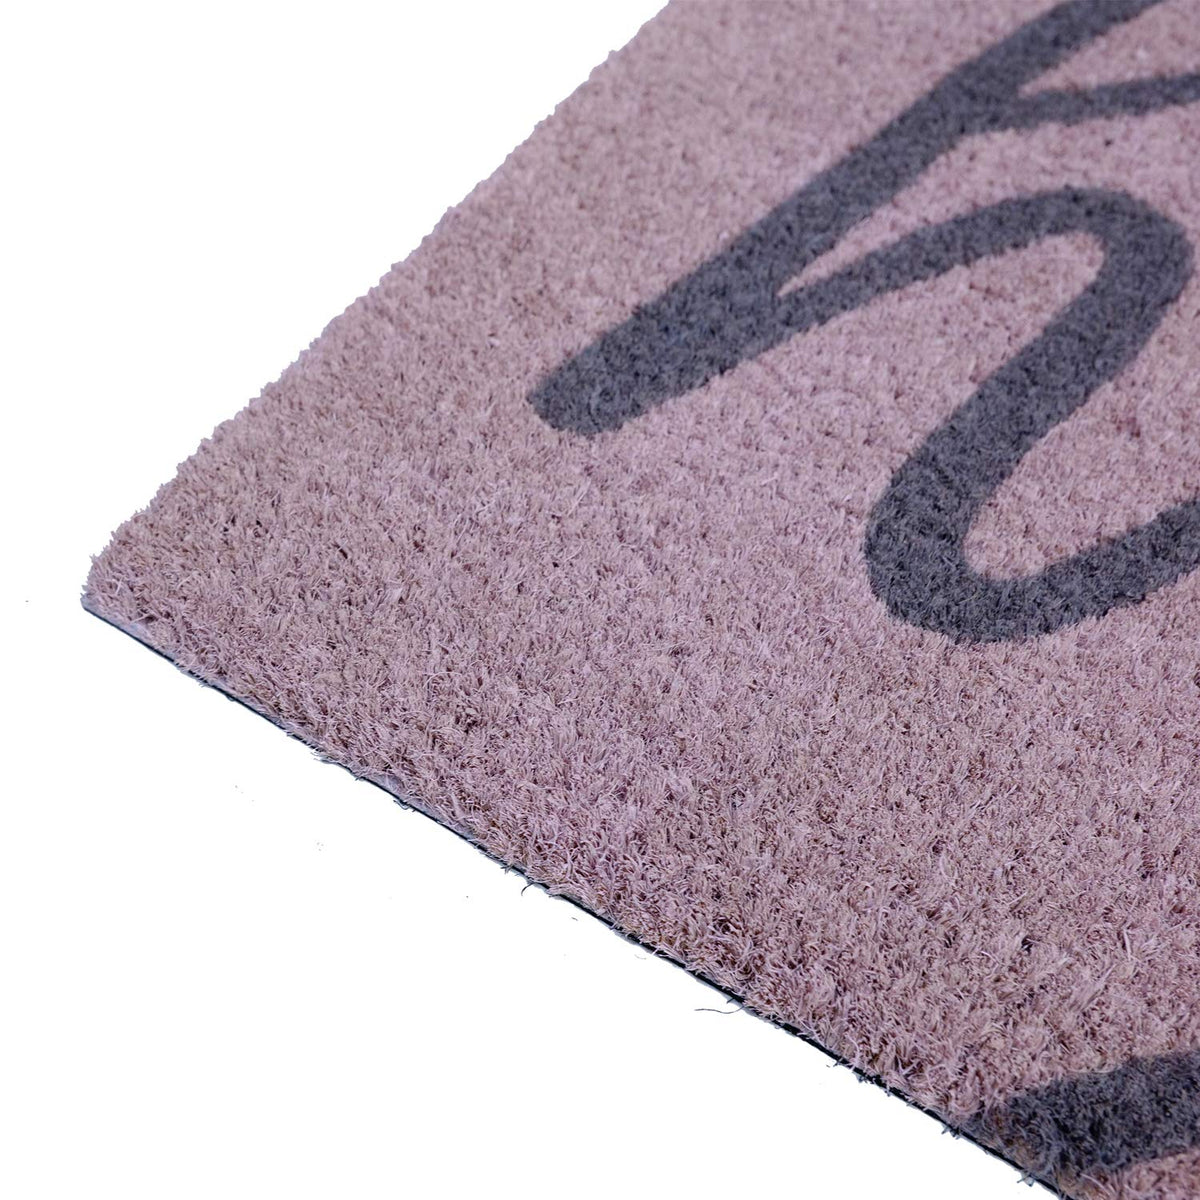 "Hey" Printed colourful Natural Coir Door mat with PVC backing - OnlyMat